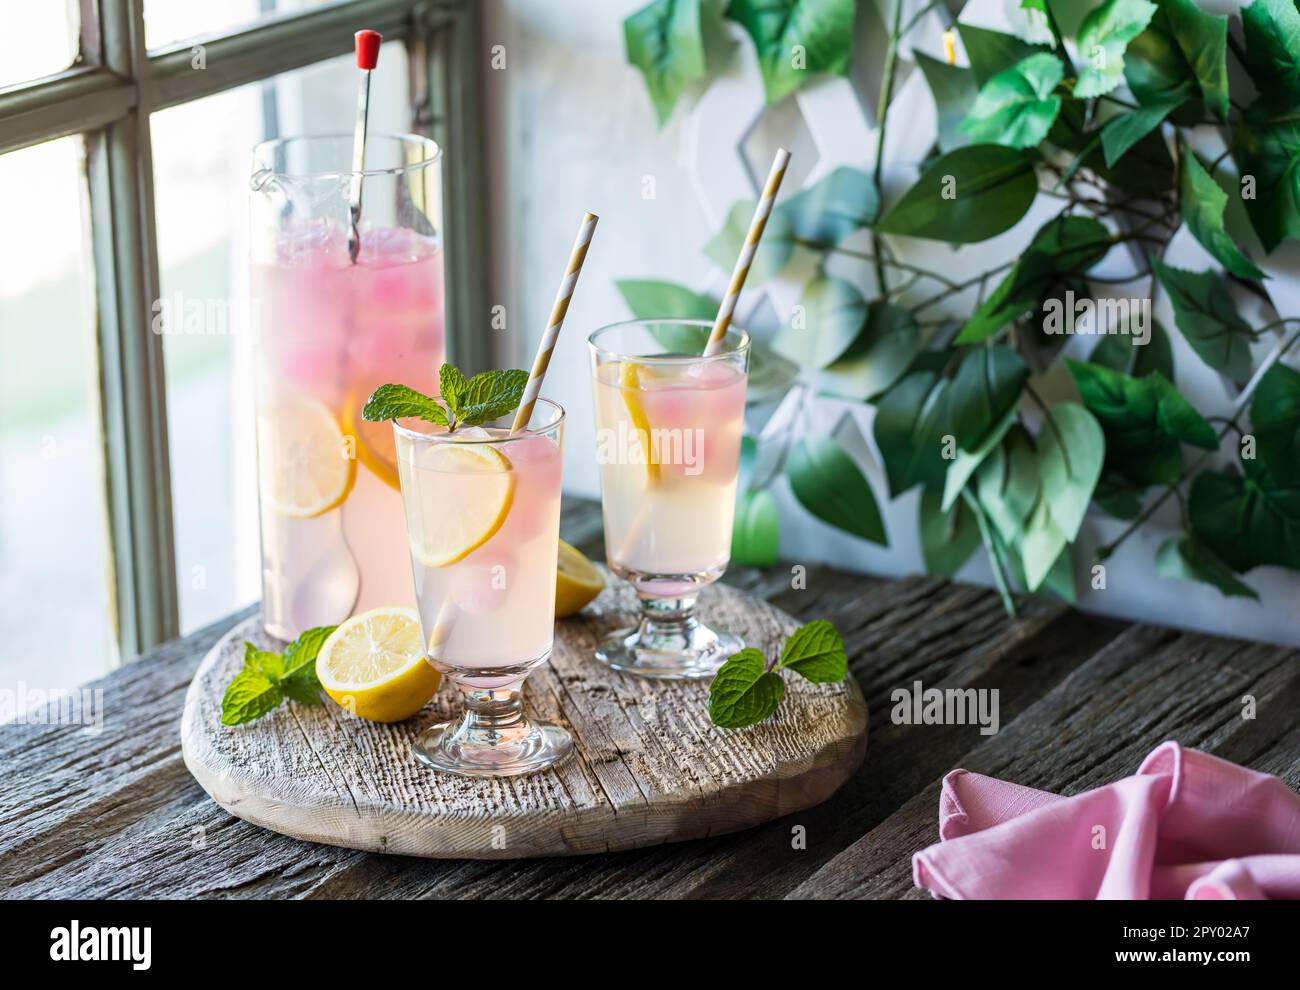 Cold and refreshing lemonade with pink lemonade ice cubes, ready for sharing. Stock Photo